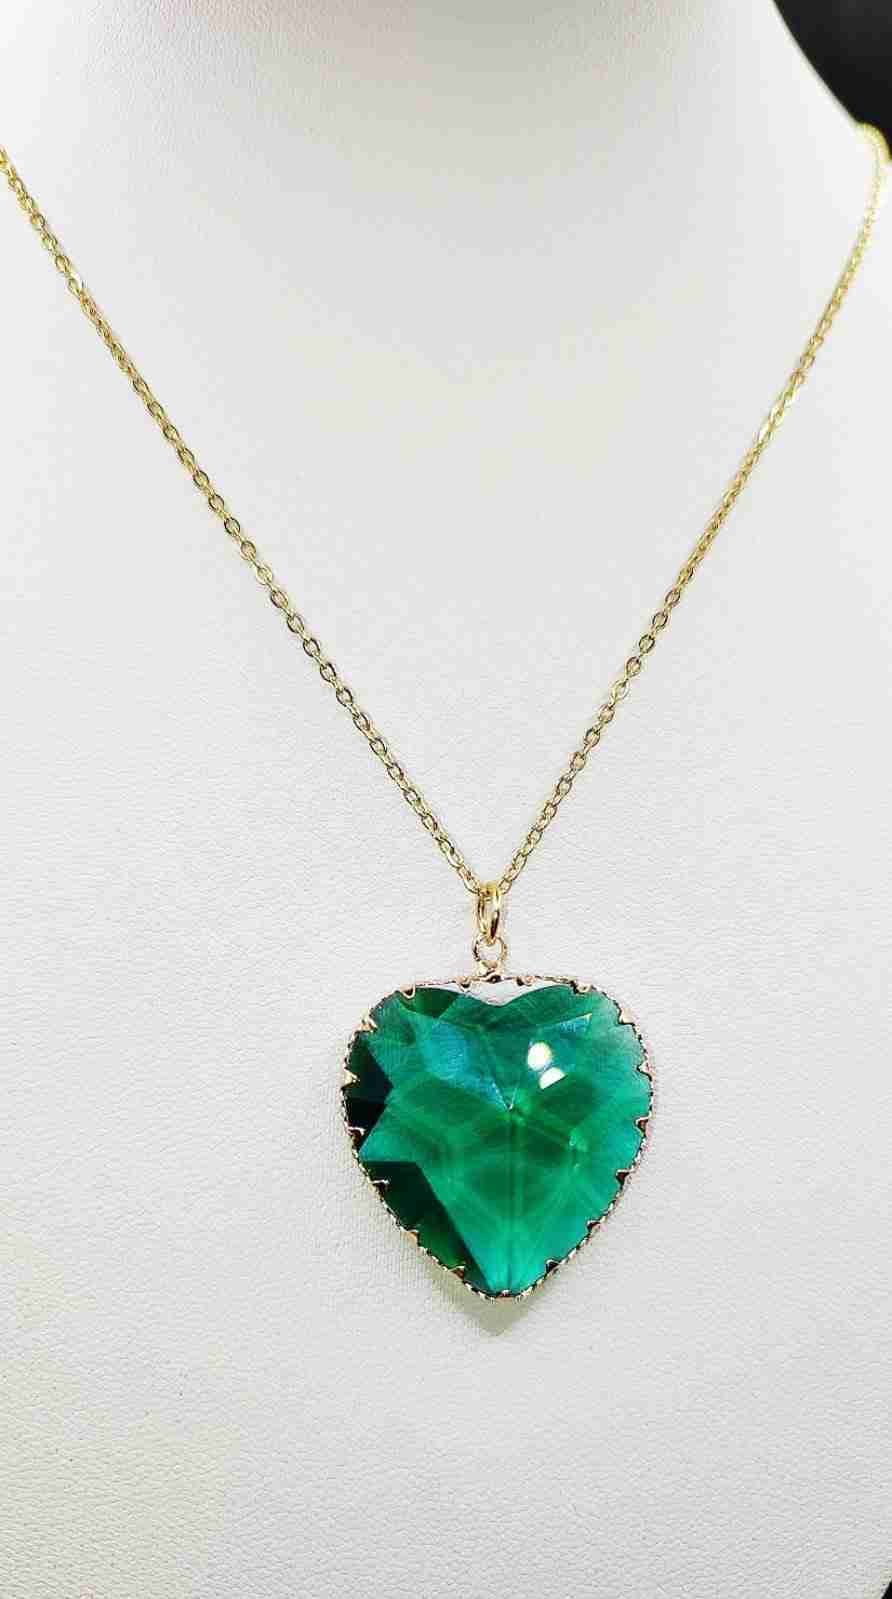 GREEN HEART NECKLACE.